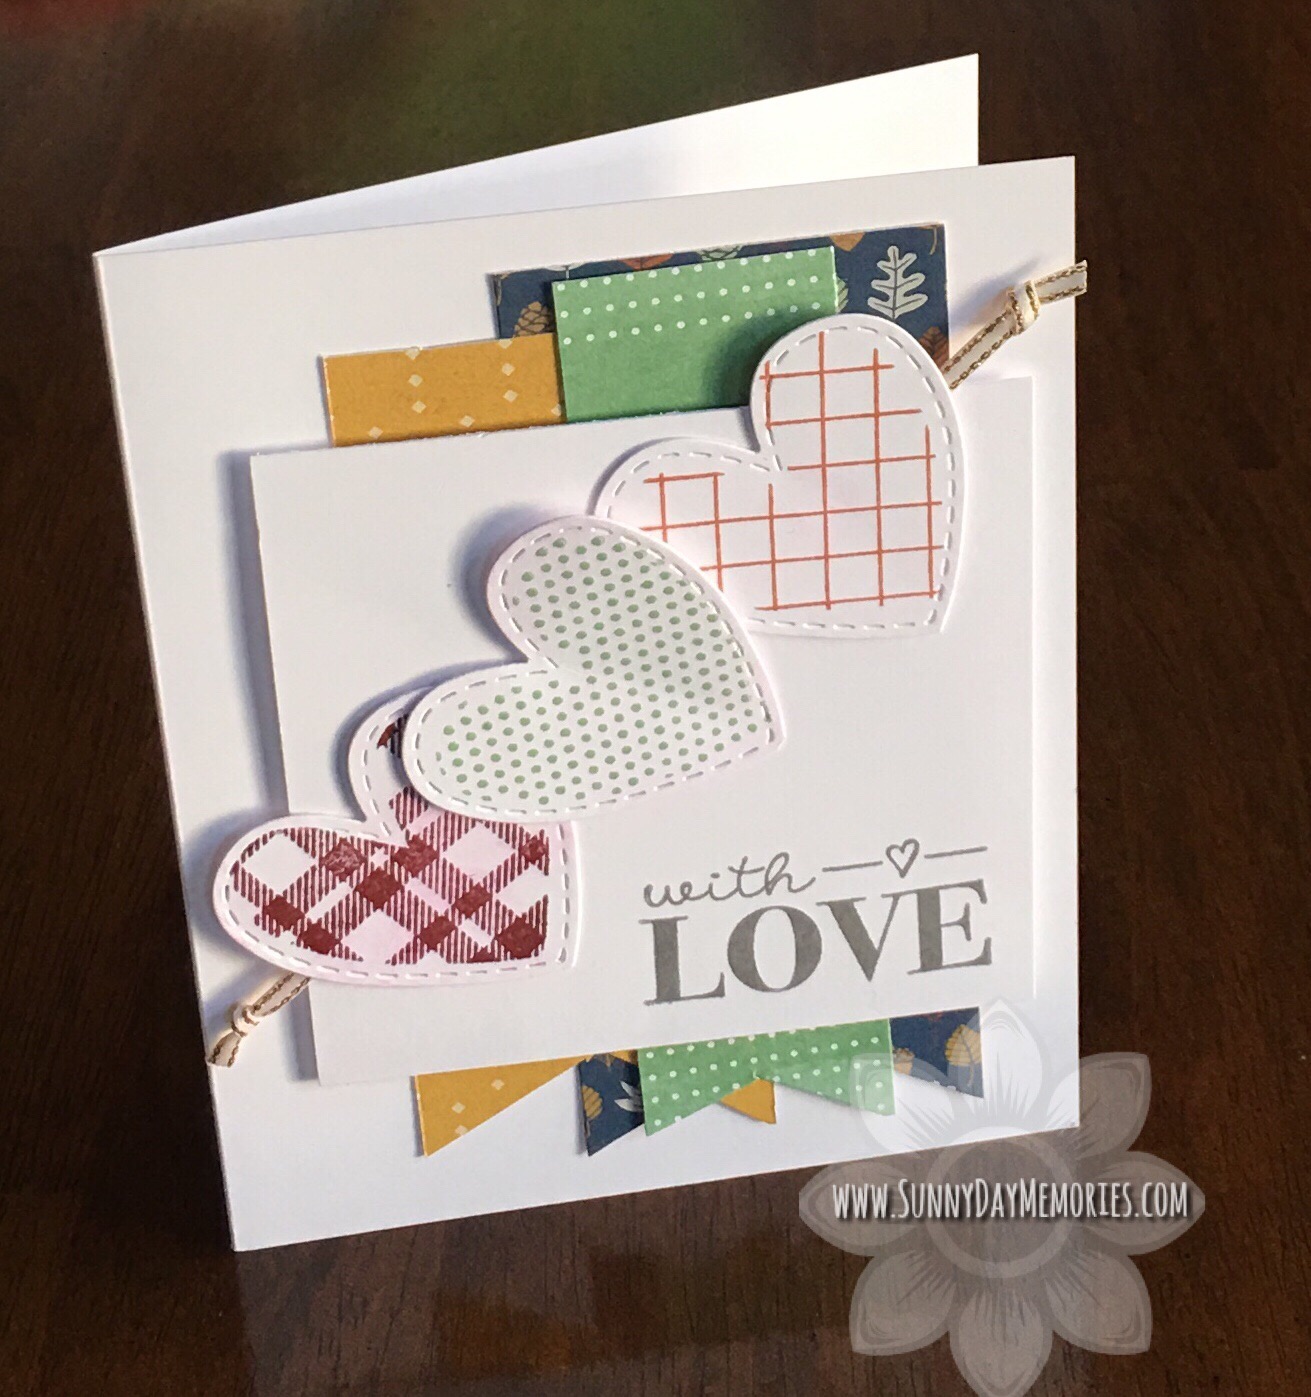 CTMH's Random Act of Cardness With Love Card